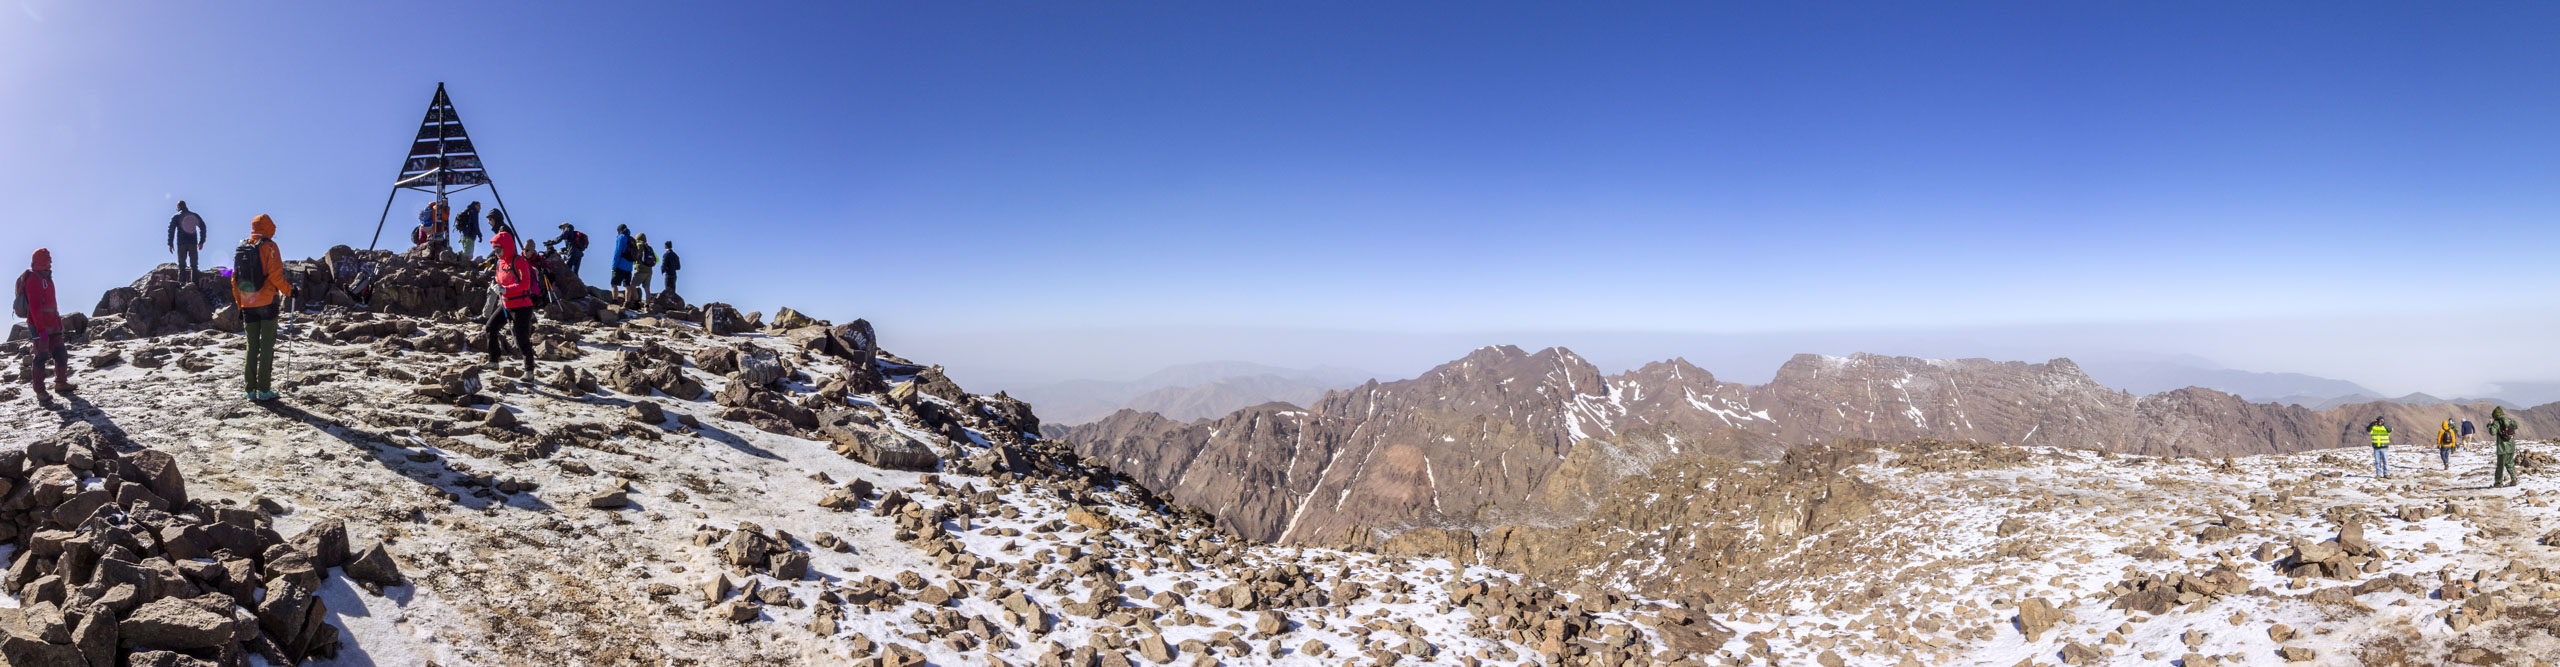 Intrepid travellers at the peak of Mount Toubkal and look out over the High Atlas Mountains